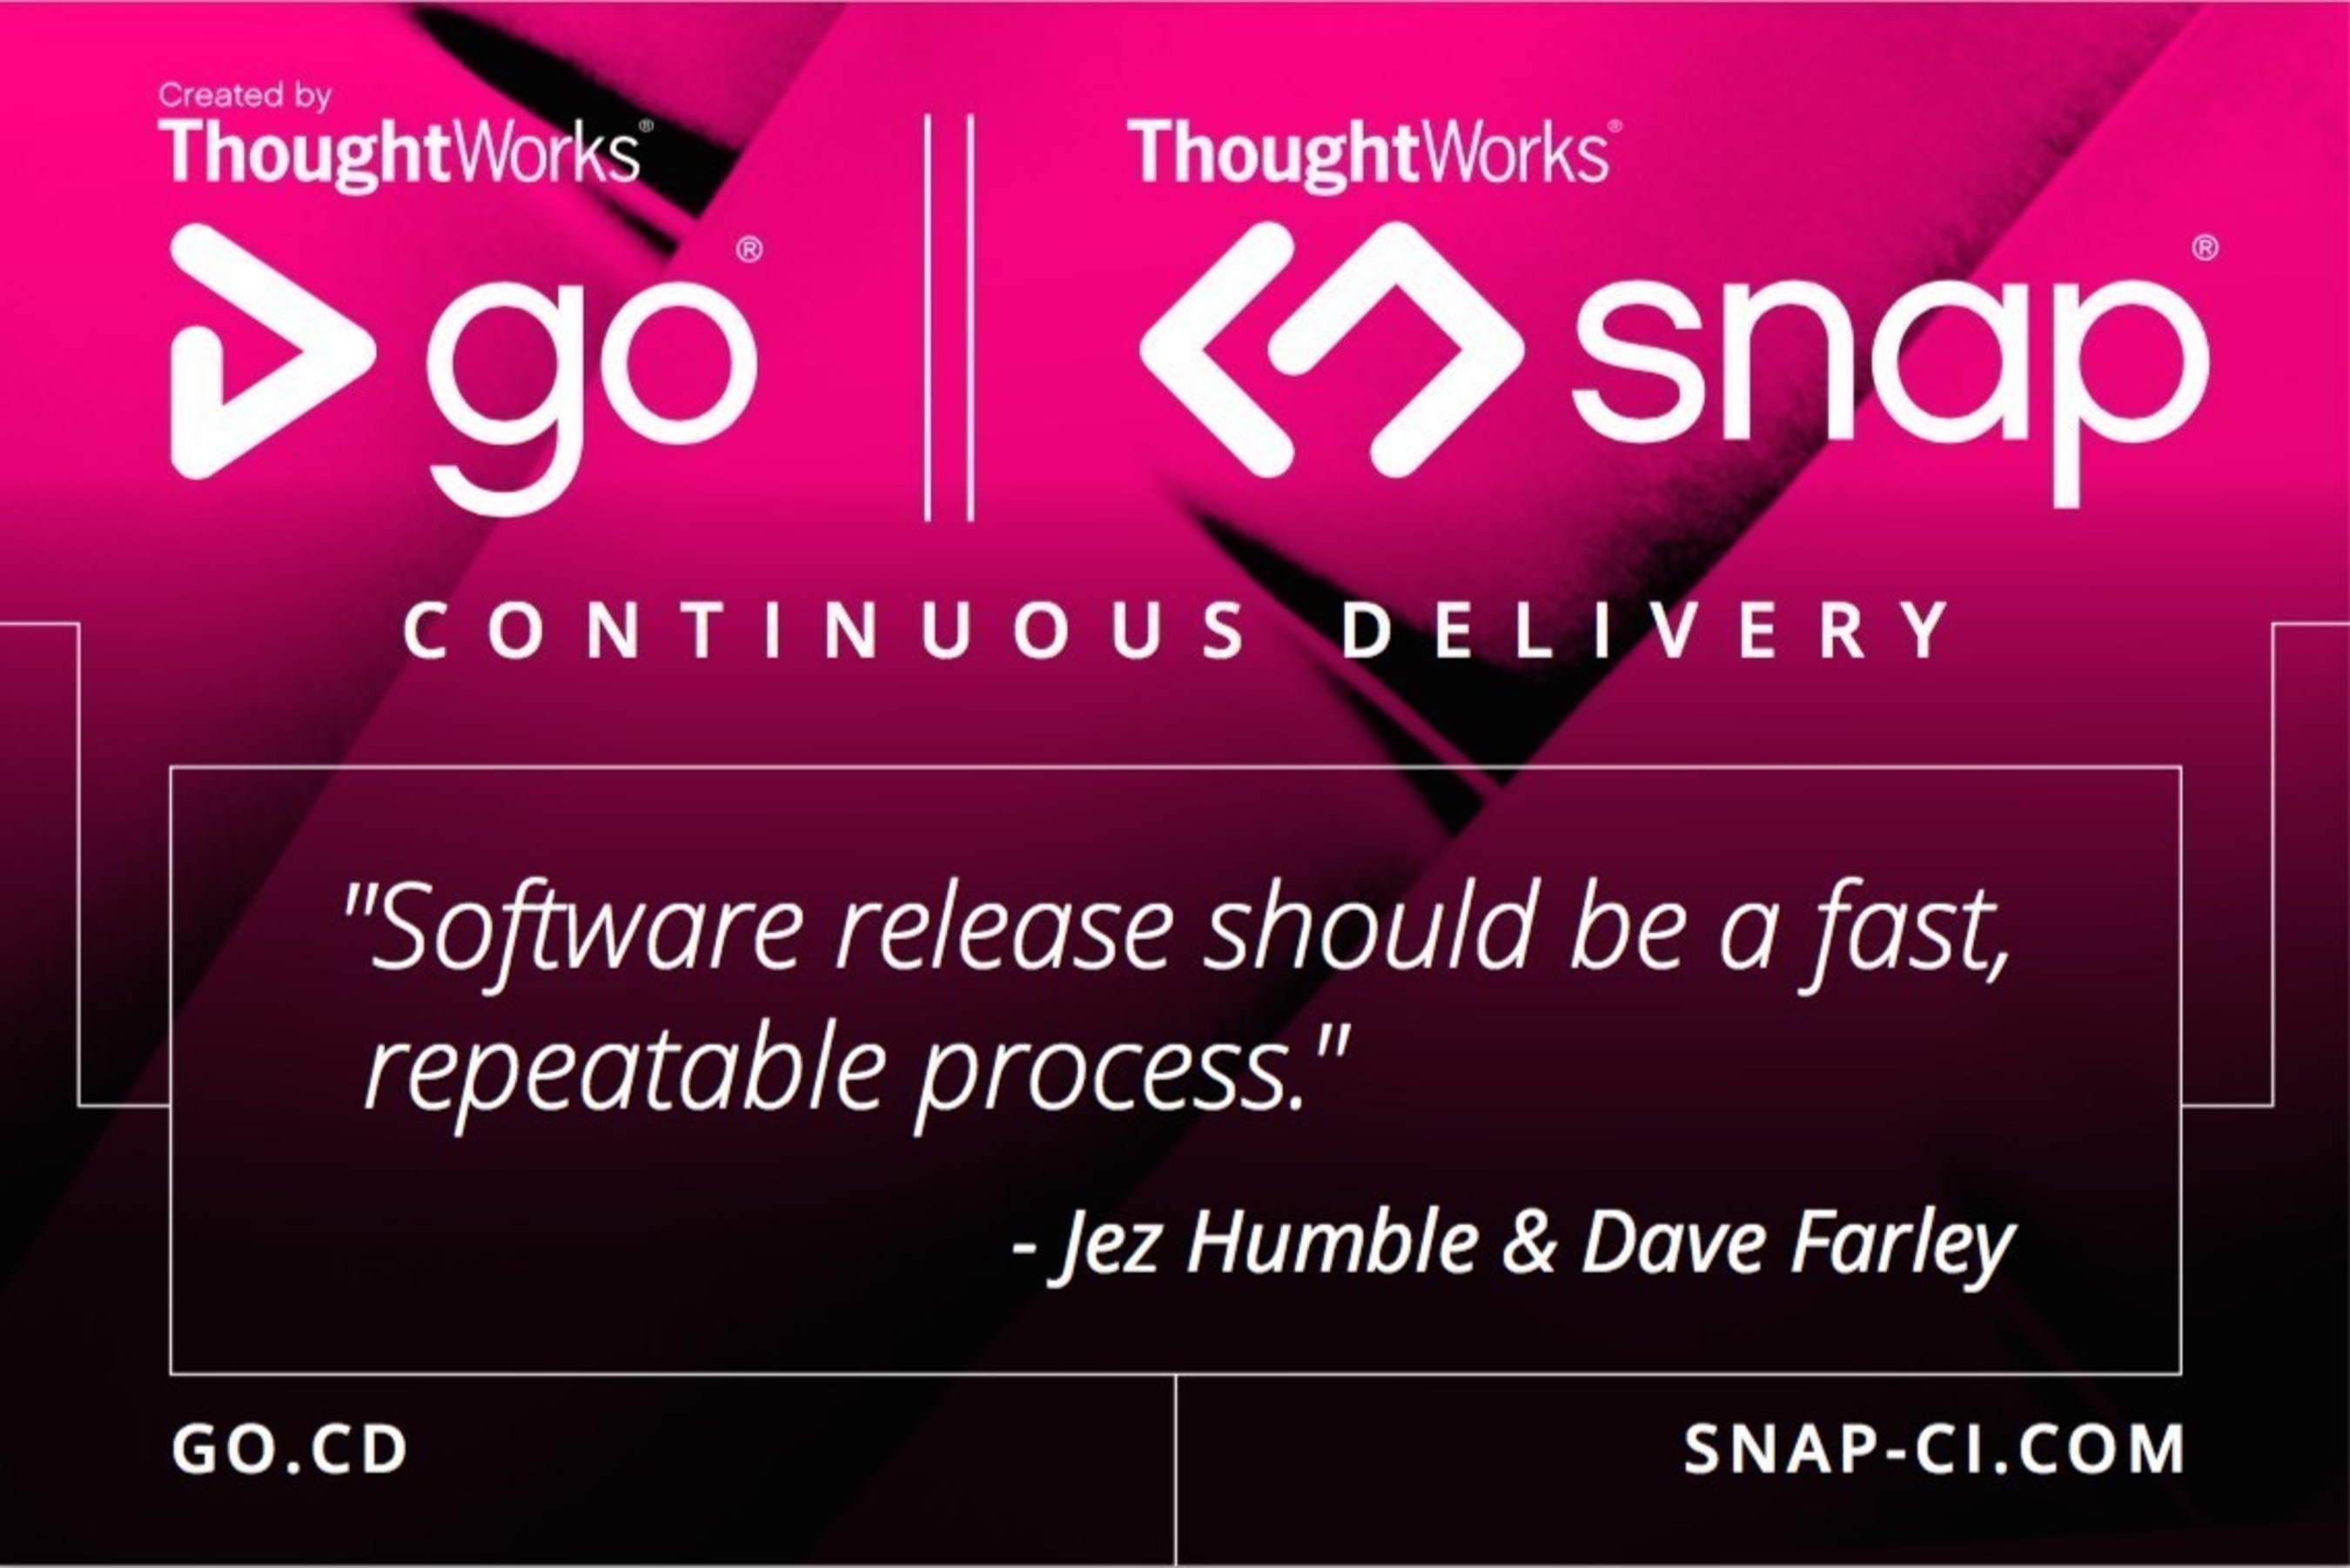 ThoughtWorks' Continuous Delivery Products Snap CI and GoCD Together at the DOES 2015